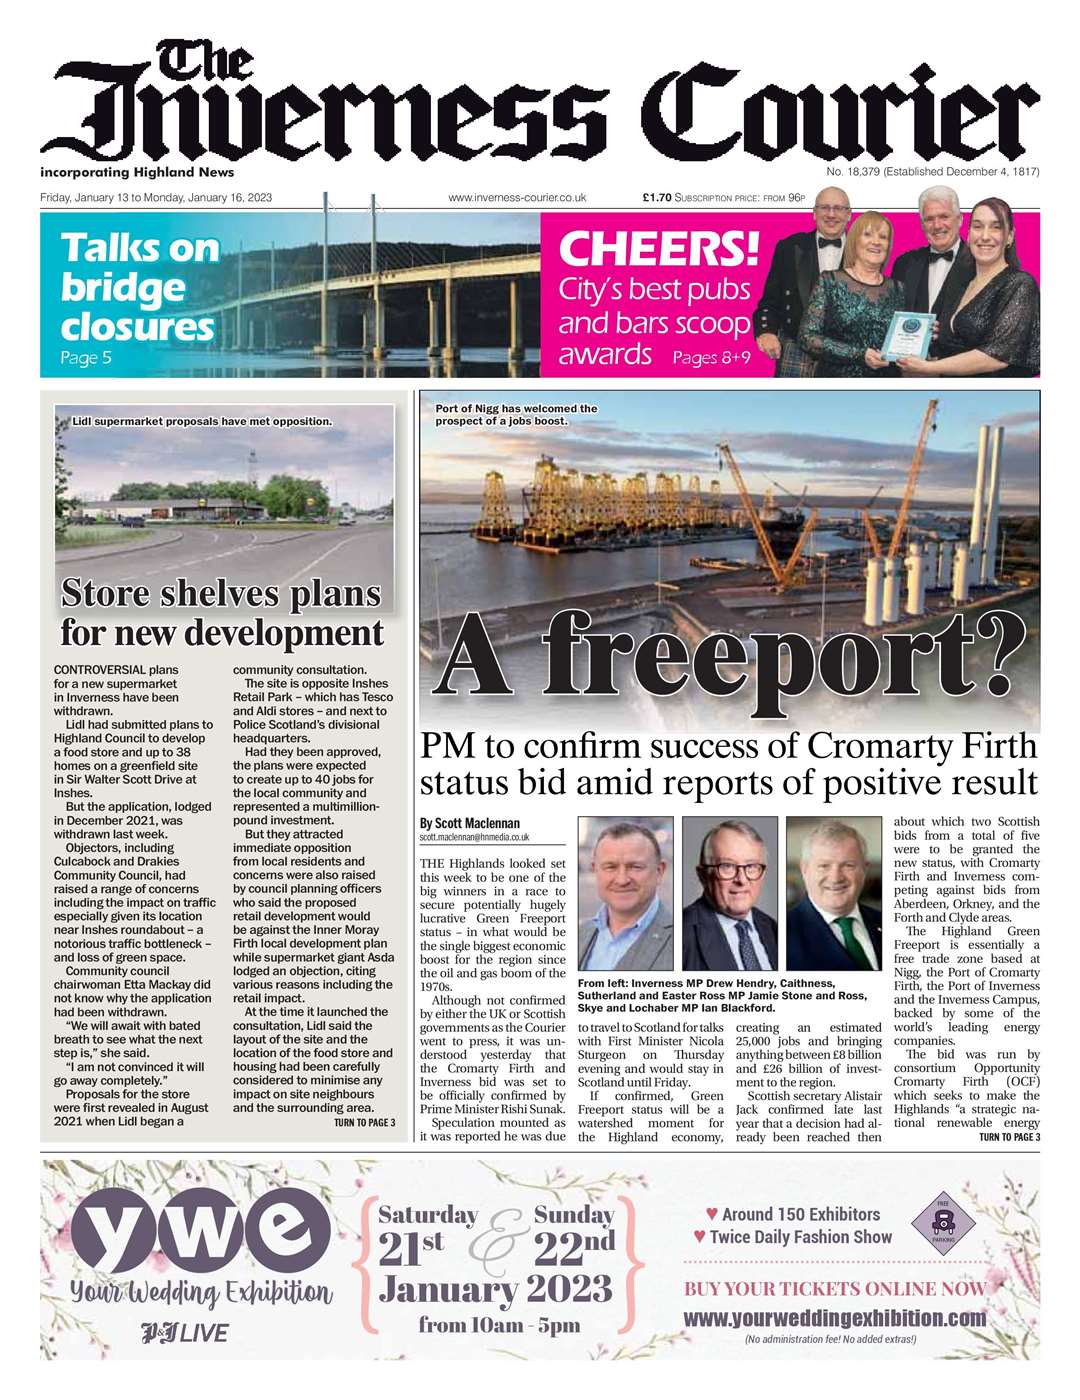 The Inverness Courier, January 13, front page.